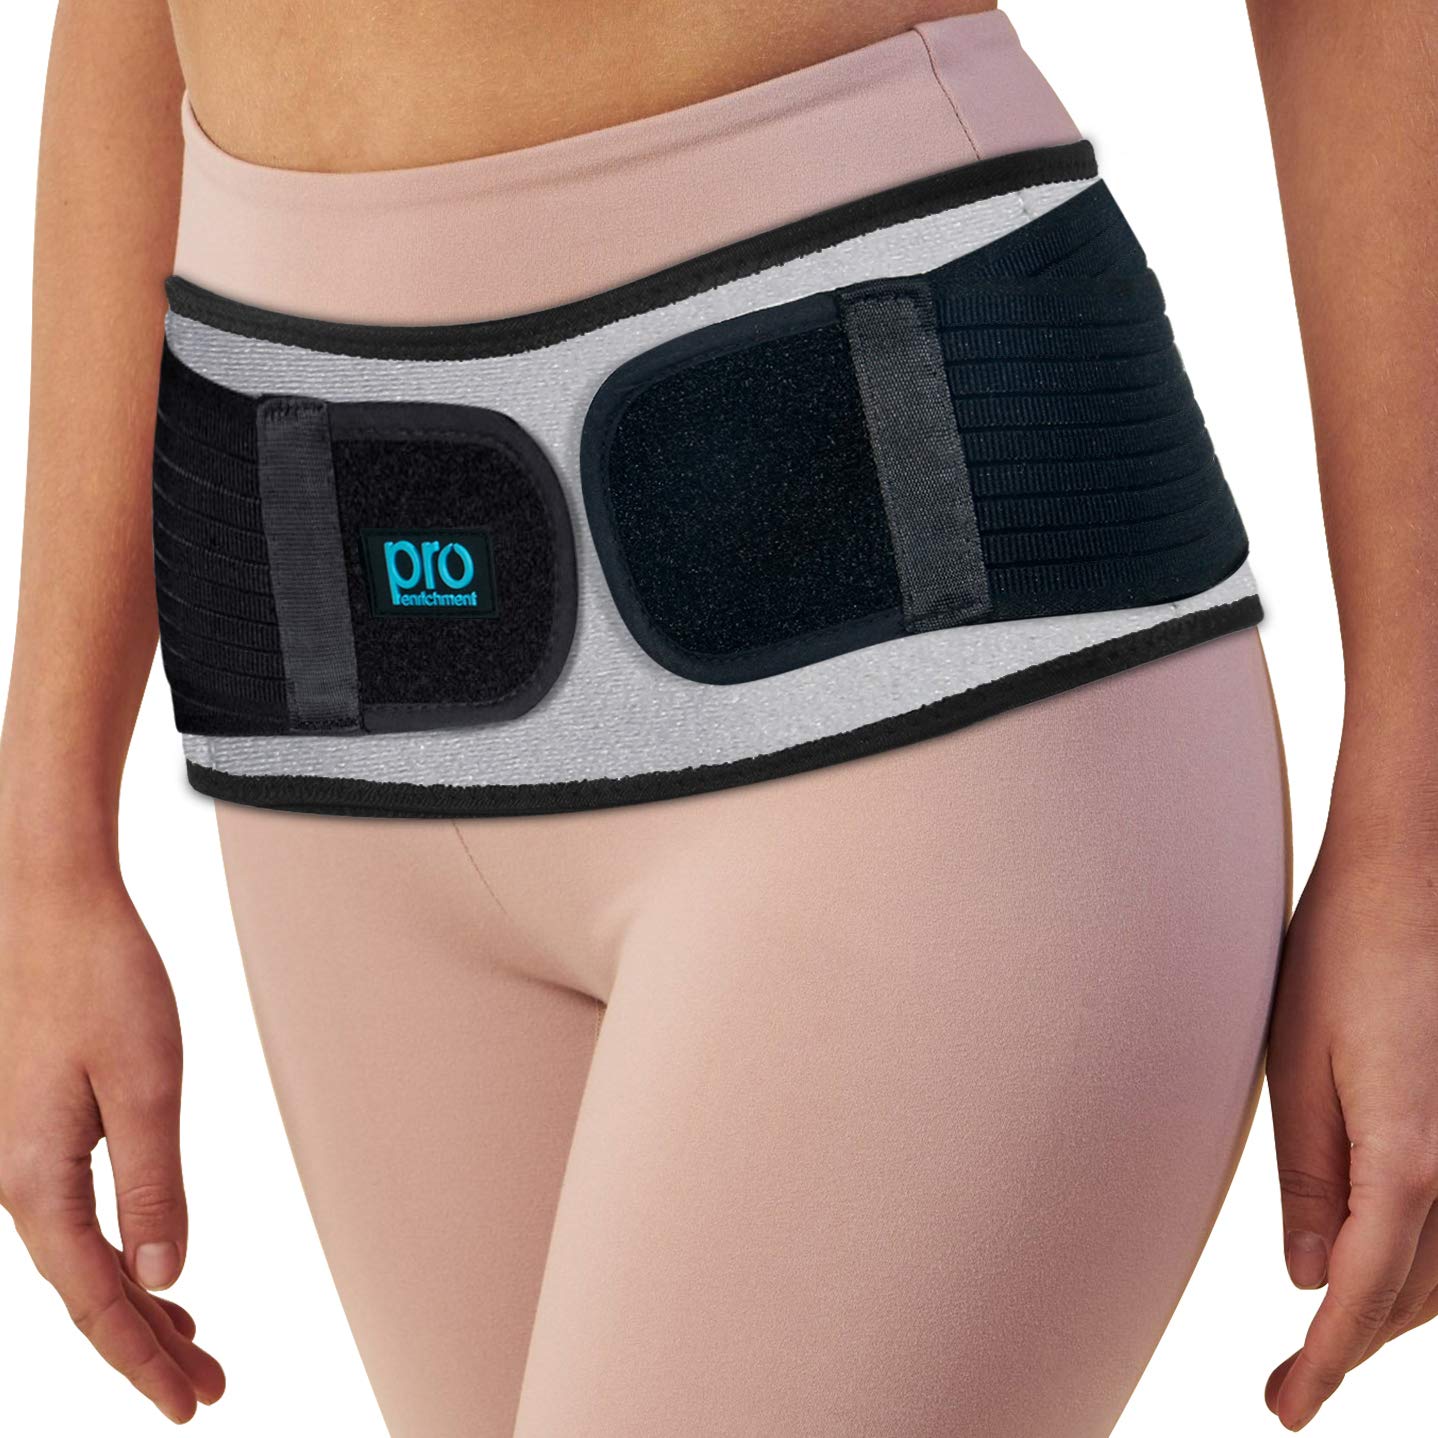 Sparthos Sacroiliac Si Hip Belt Relief from Si Joint, Sciatica, Pelvis,  Lower Back Pain - Support Brace for Women and Men - for Sacral Nerve, Hip  Loc